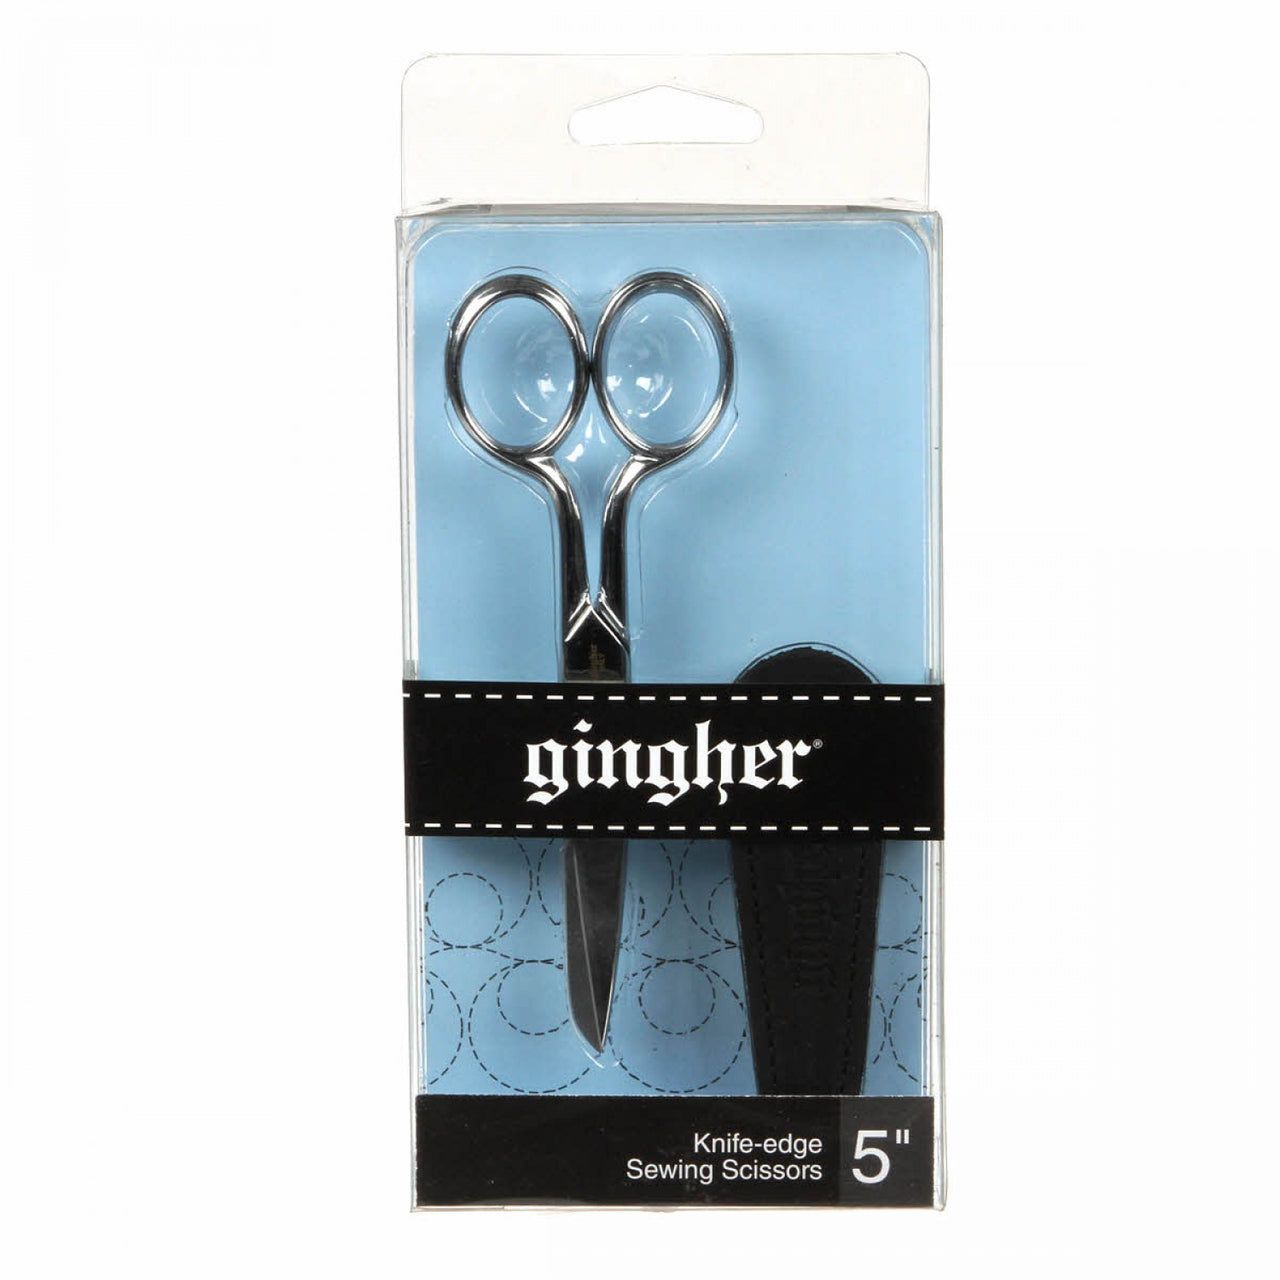 Gingher 5" knife-edge sewing scissors